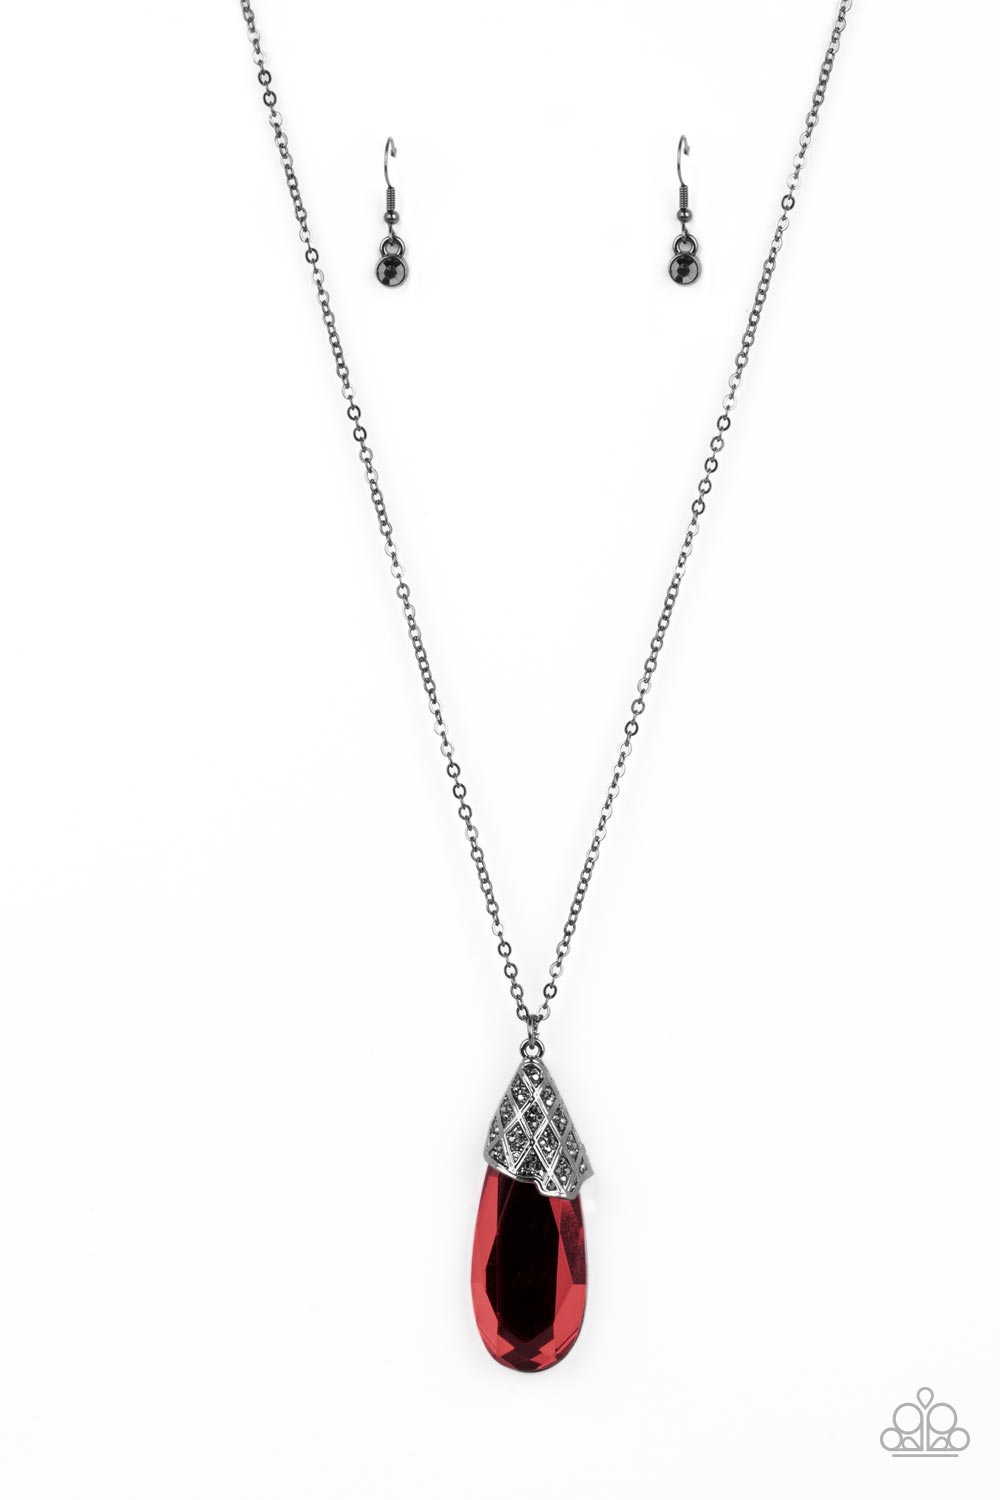 Dibs on the Dazzle - Red Necklace